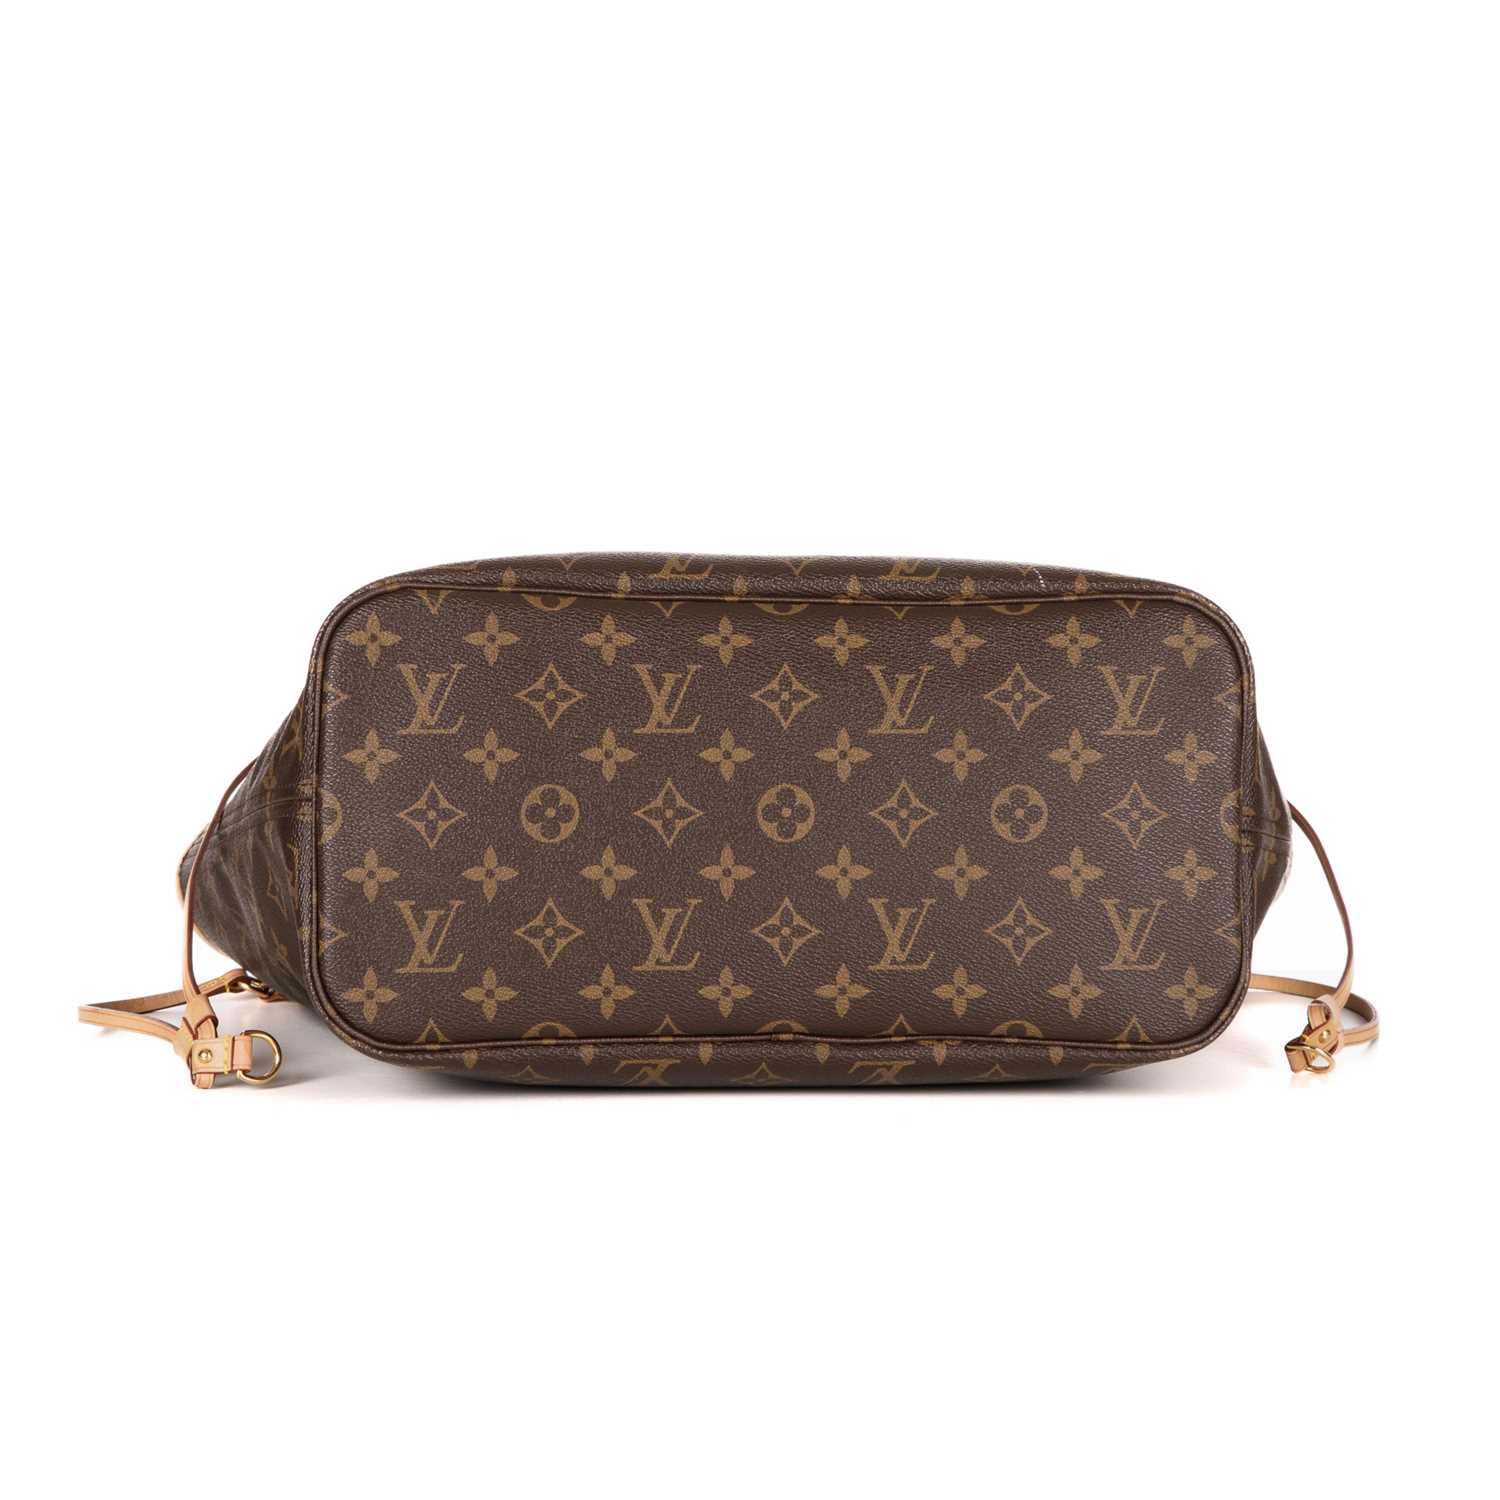 Louis Vuitton, a monogram Neverfull MM handbag w/pouch, designed with the maker's monogram coated - Image 4 of 4